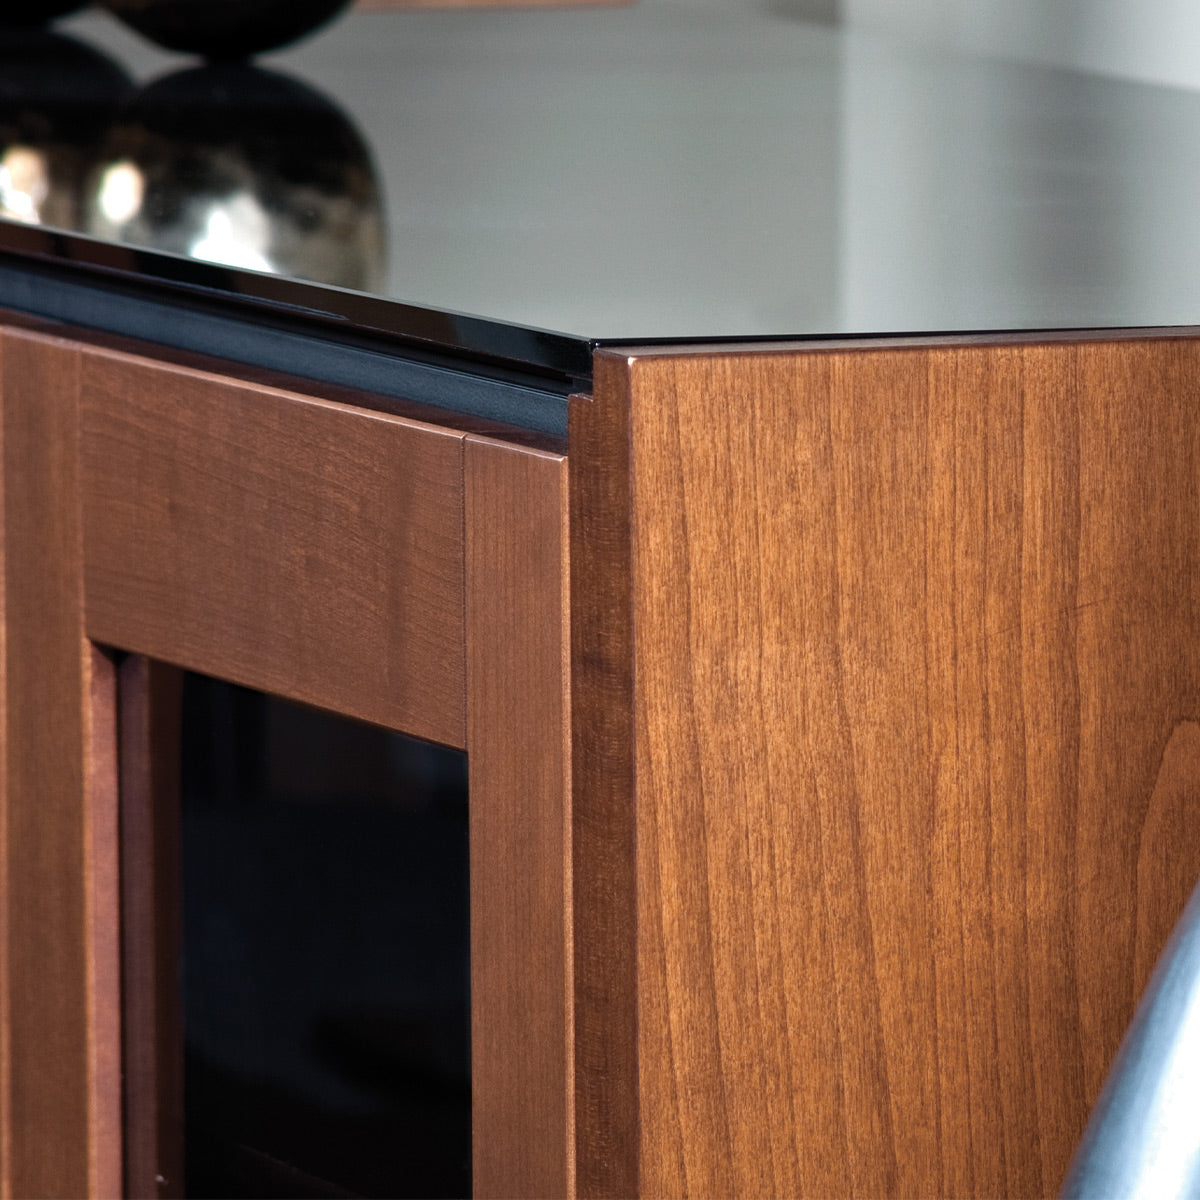 Salamander Chameleon Collection Corsica 323 Twin Corner AV Cabinet (Thick Cherry with Black Glass Top)